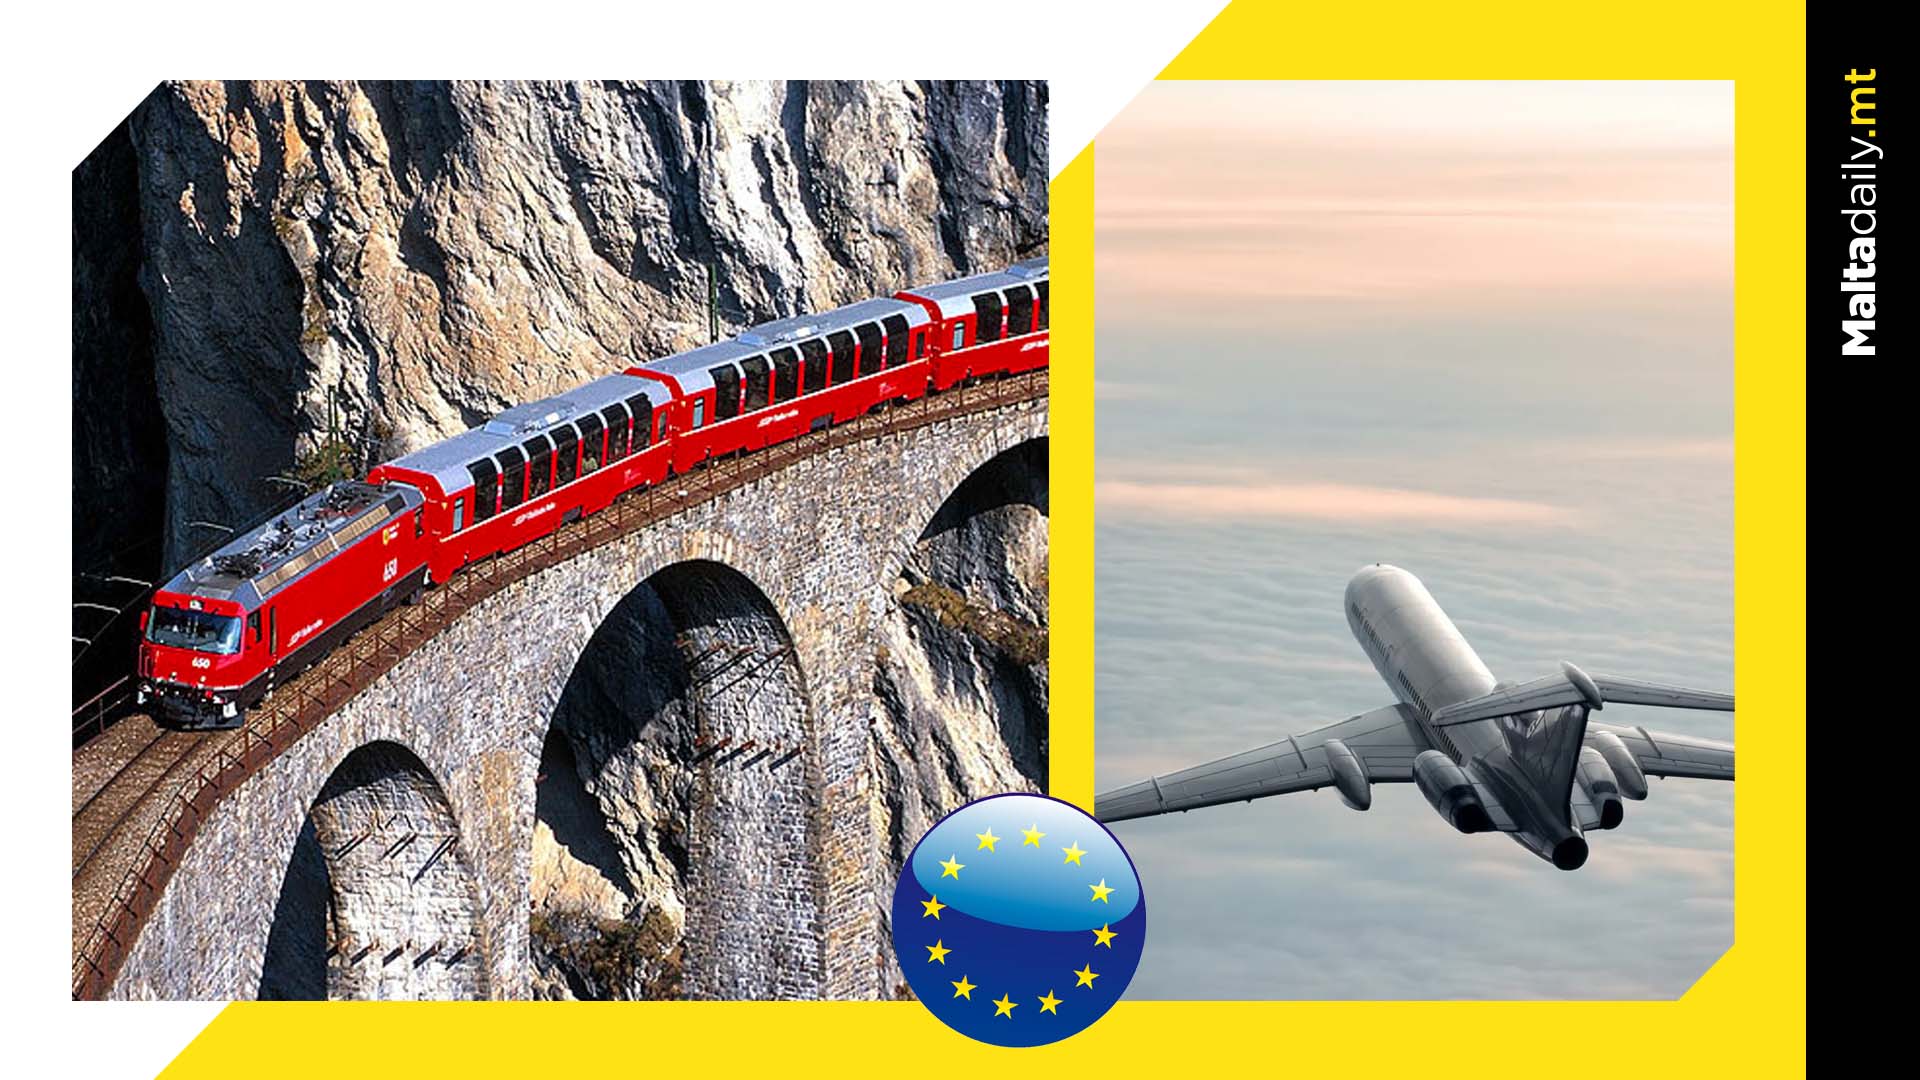 The future of Europe? No more planes, just trains.